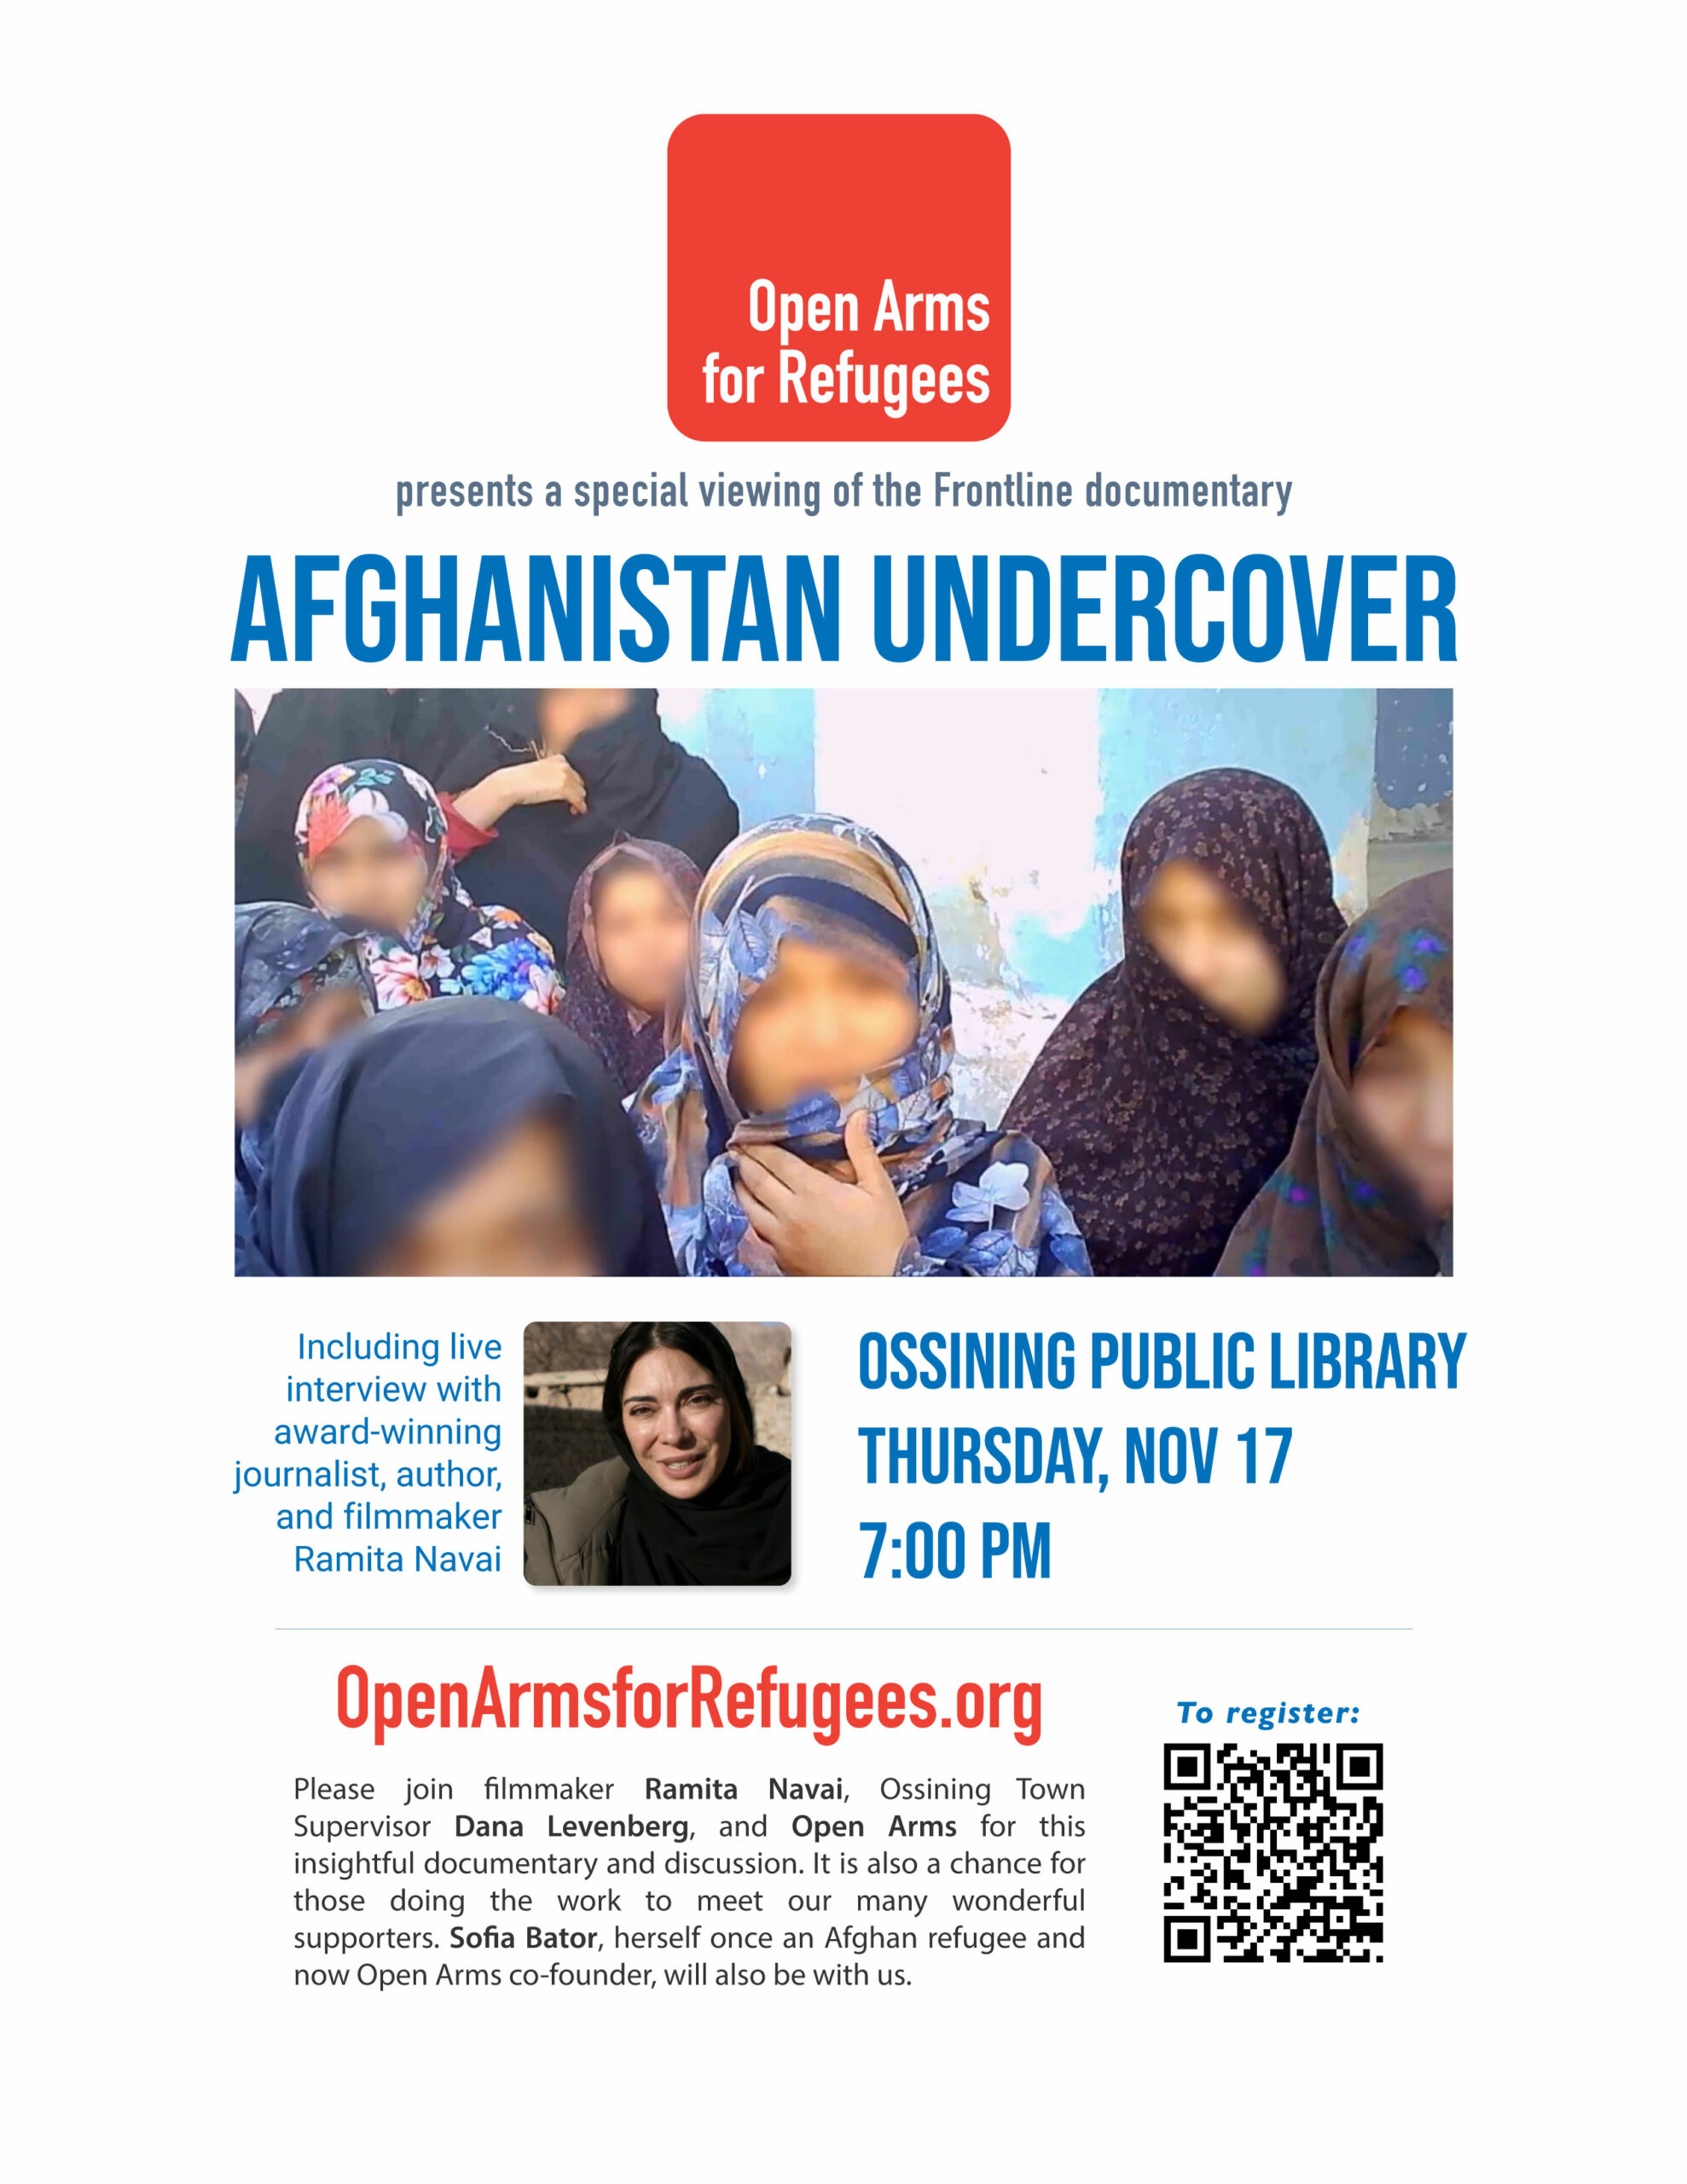 OpenArms_afghanuncovered